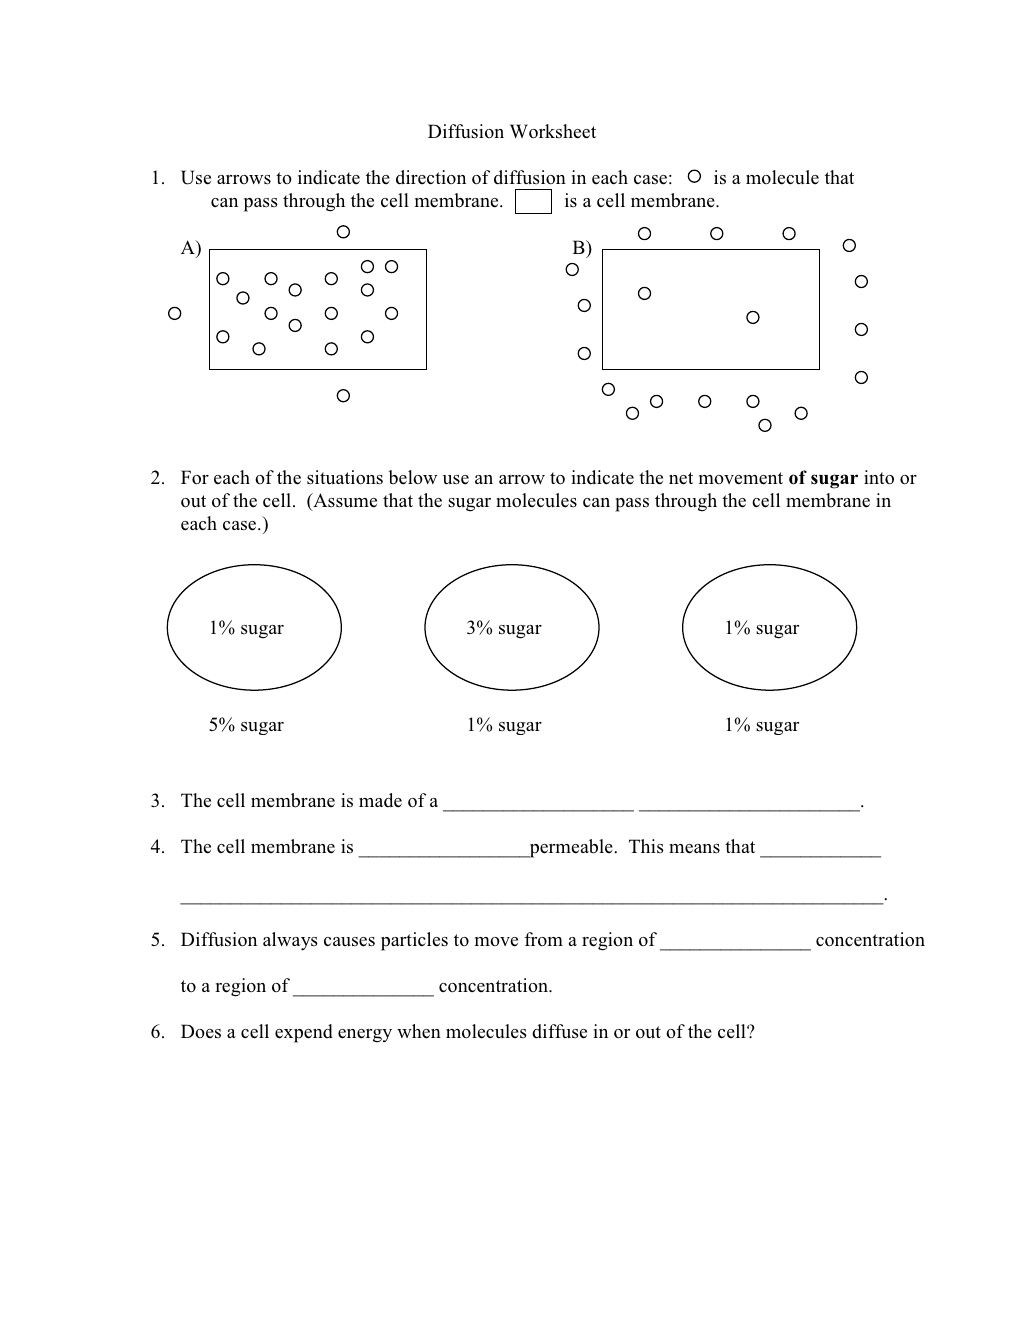 Diffusion and Osmosis Worksheet Pin by ashley Ramey On Life Science In 2020